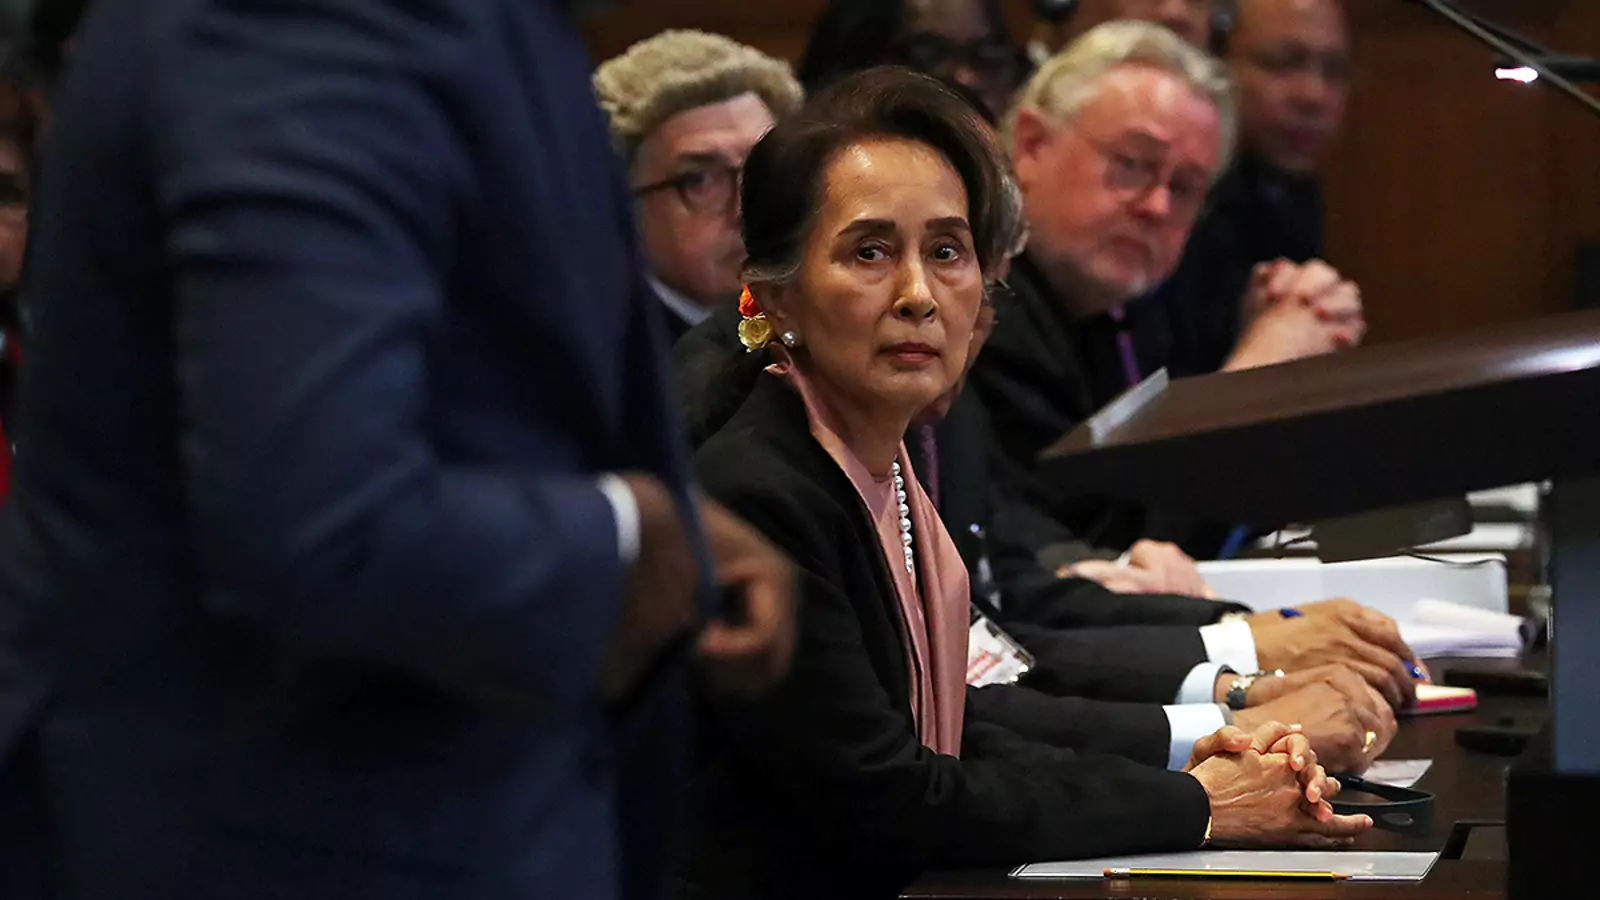 Myanmar leader Aung San Suu Kyi listens as Gambian Justice Minister Abubacarr Tambadou speaks at a hearing at the International Court of Justice in The Hague, Netherlands.